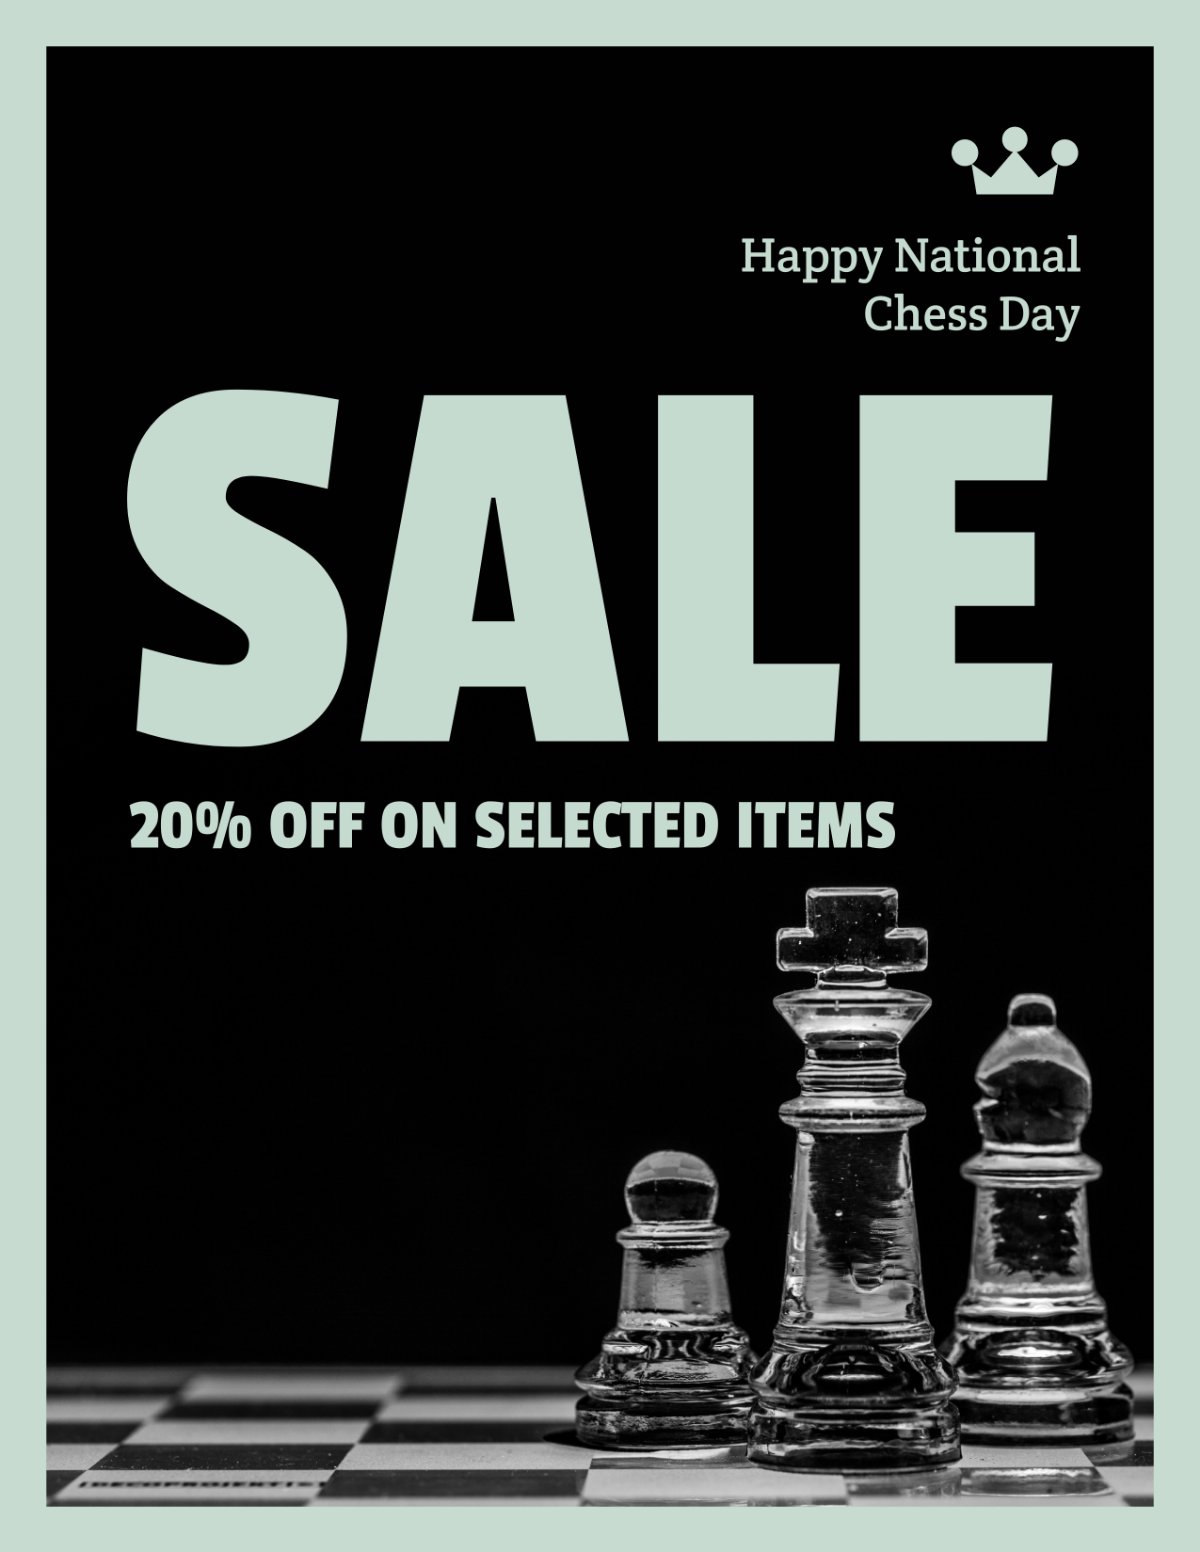 National Chess Day Sales Flyer Template